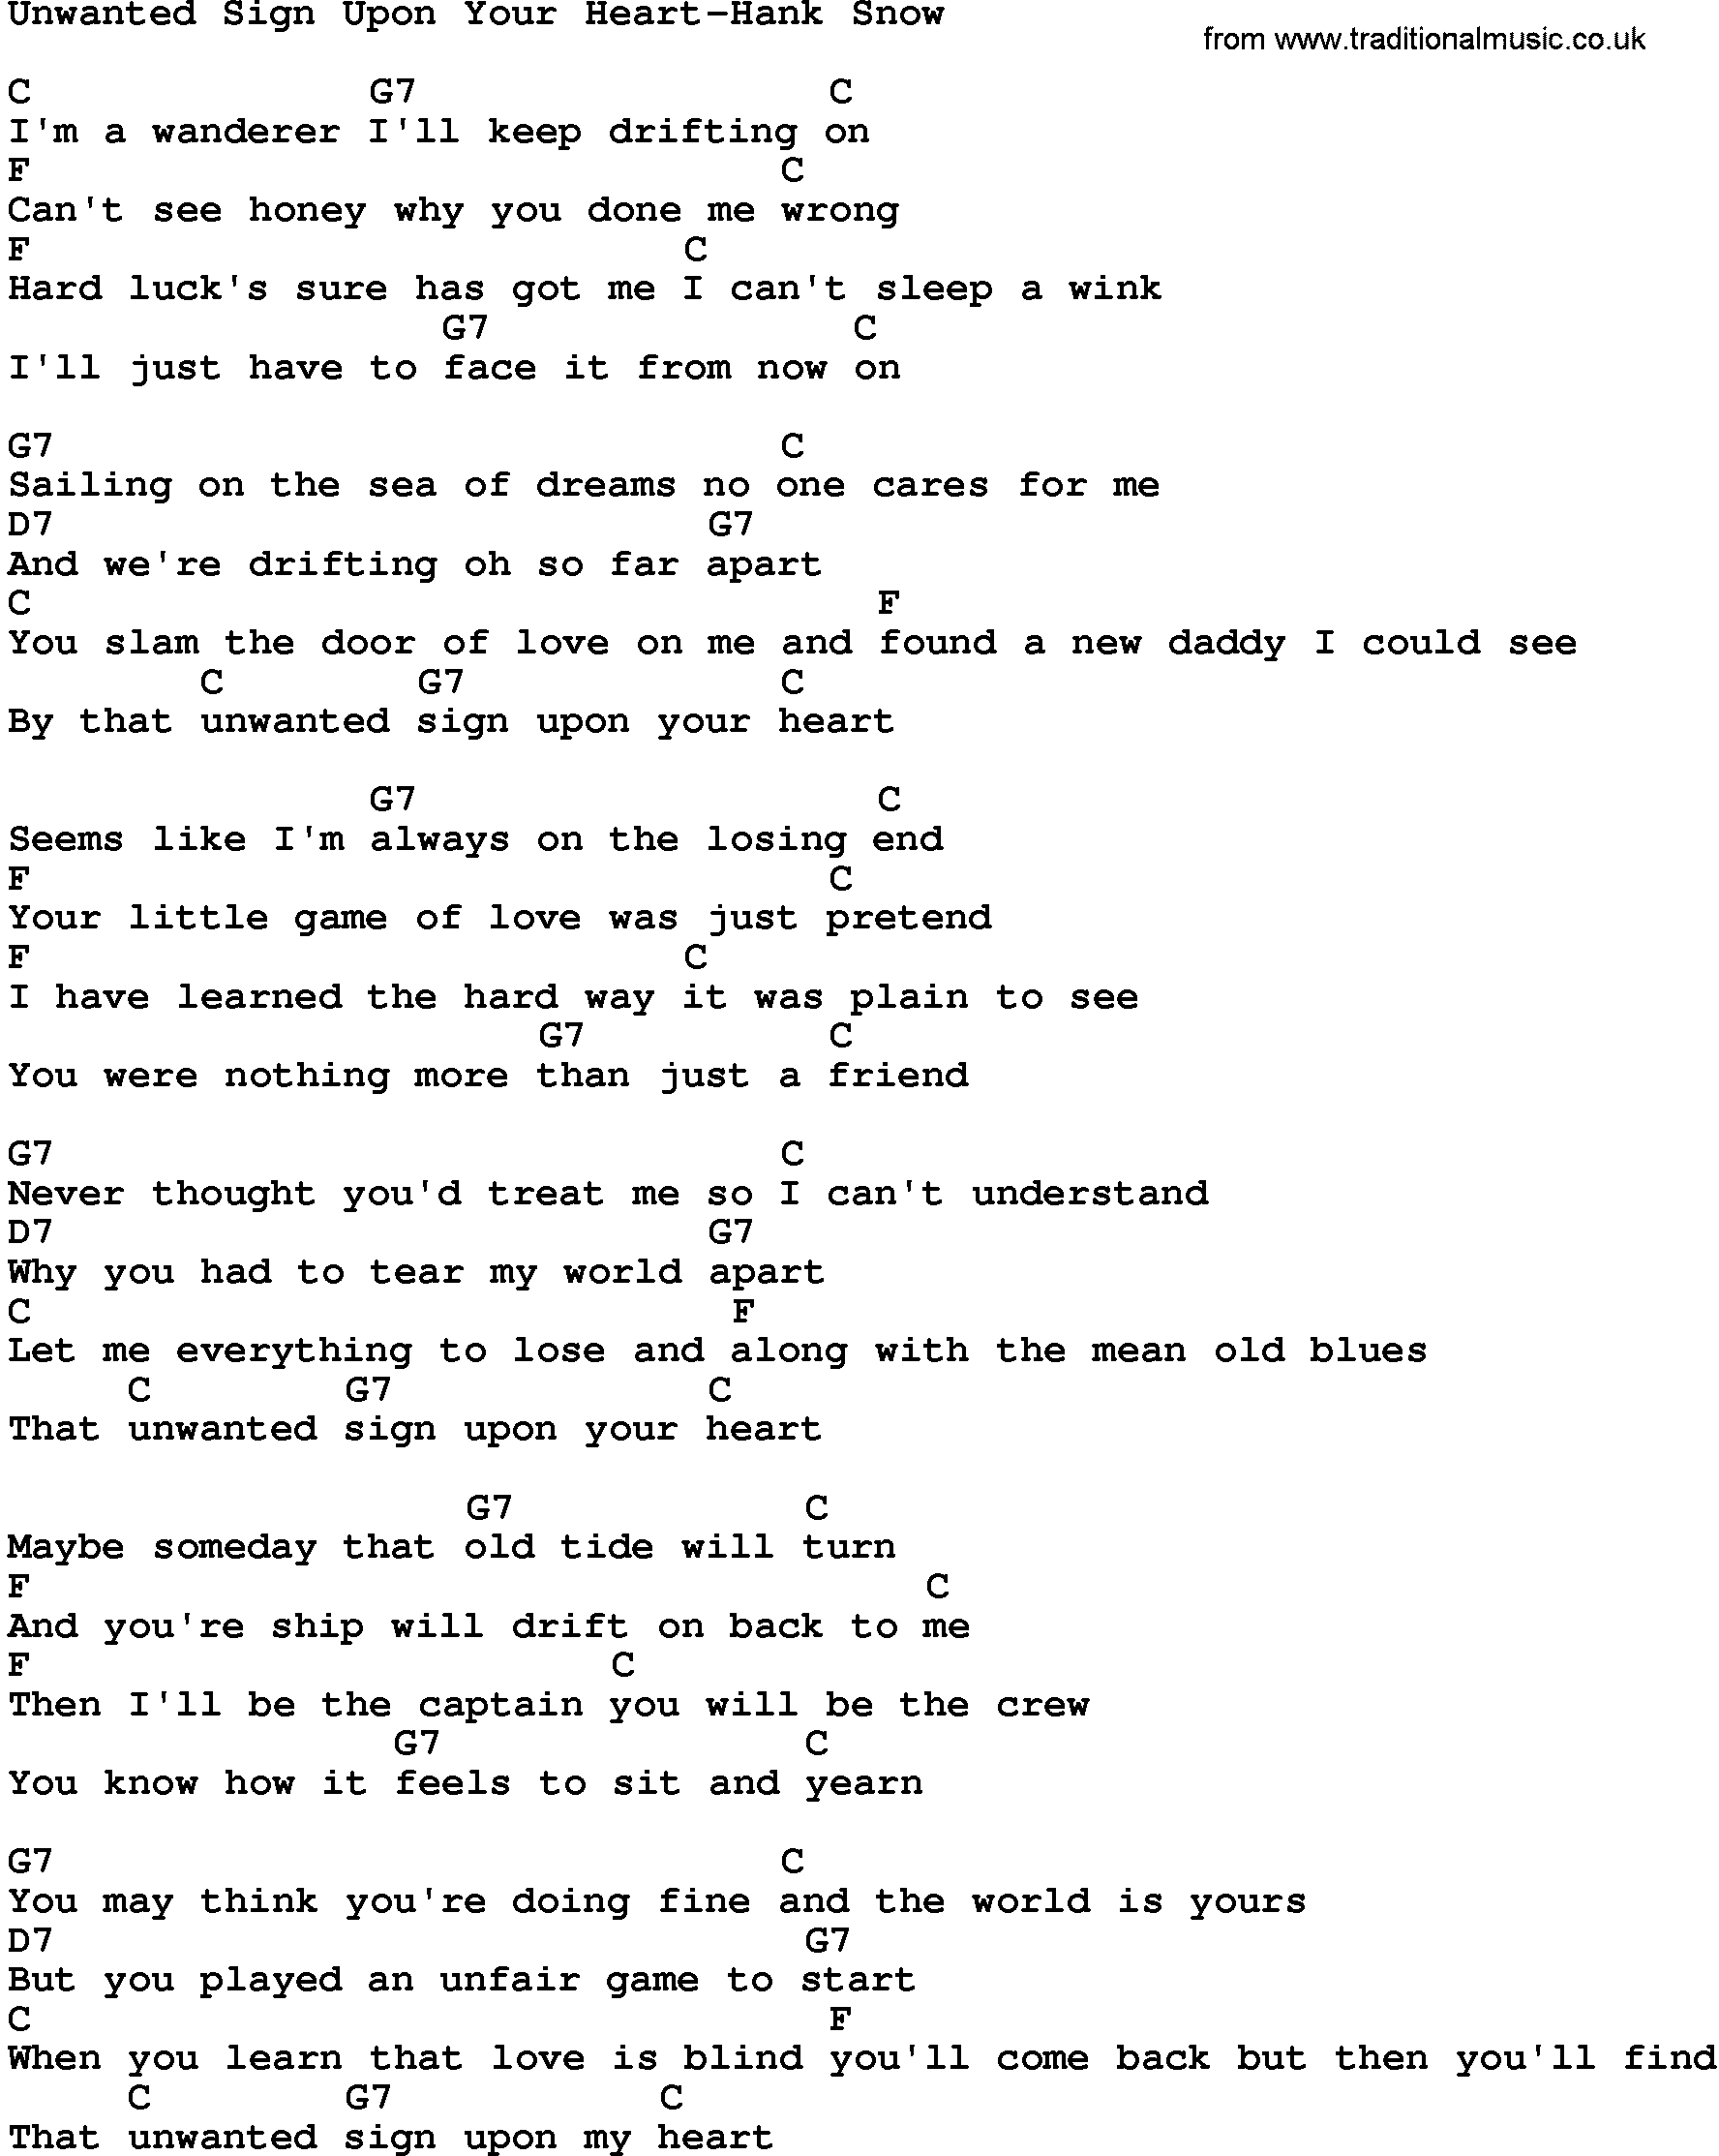 Country Music:Unwanted Sign Upon Your Heart-Hank Snow Lyrics and Chords